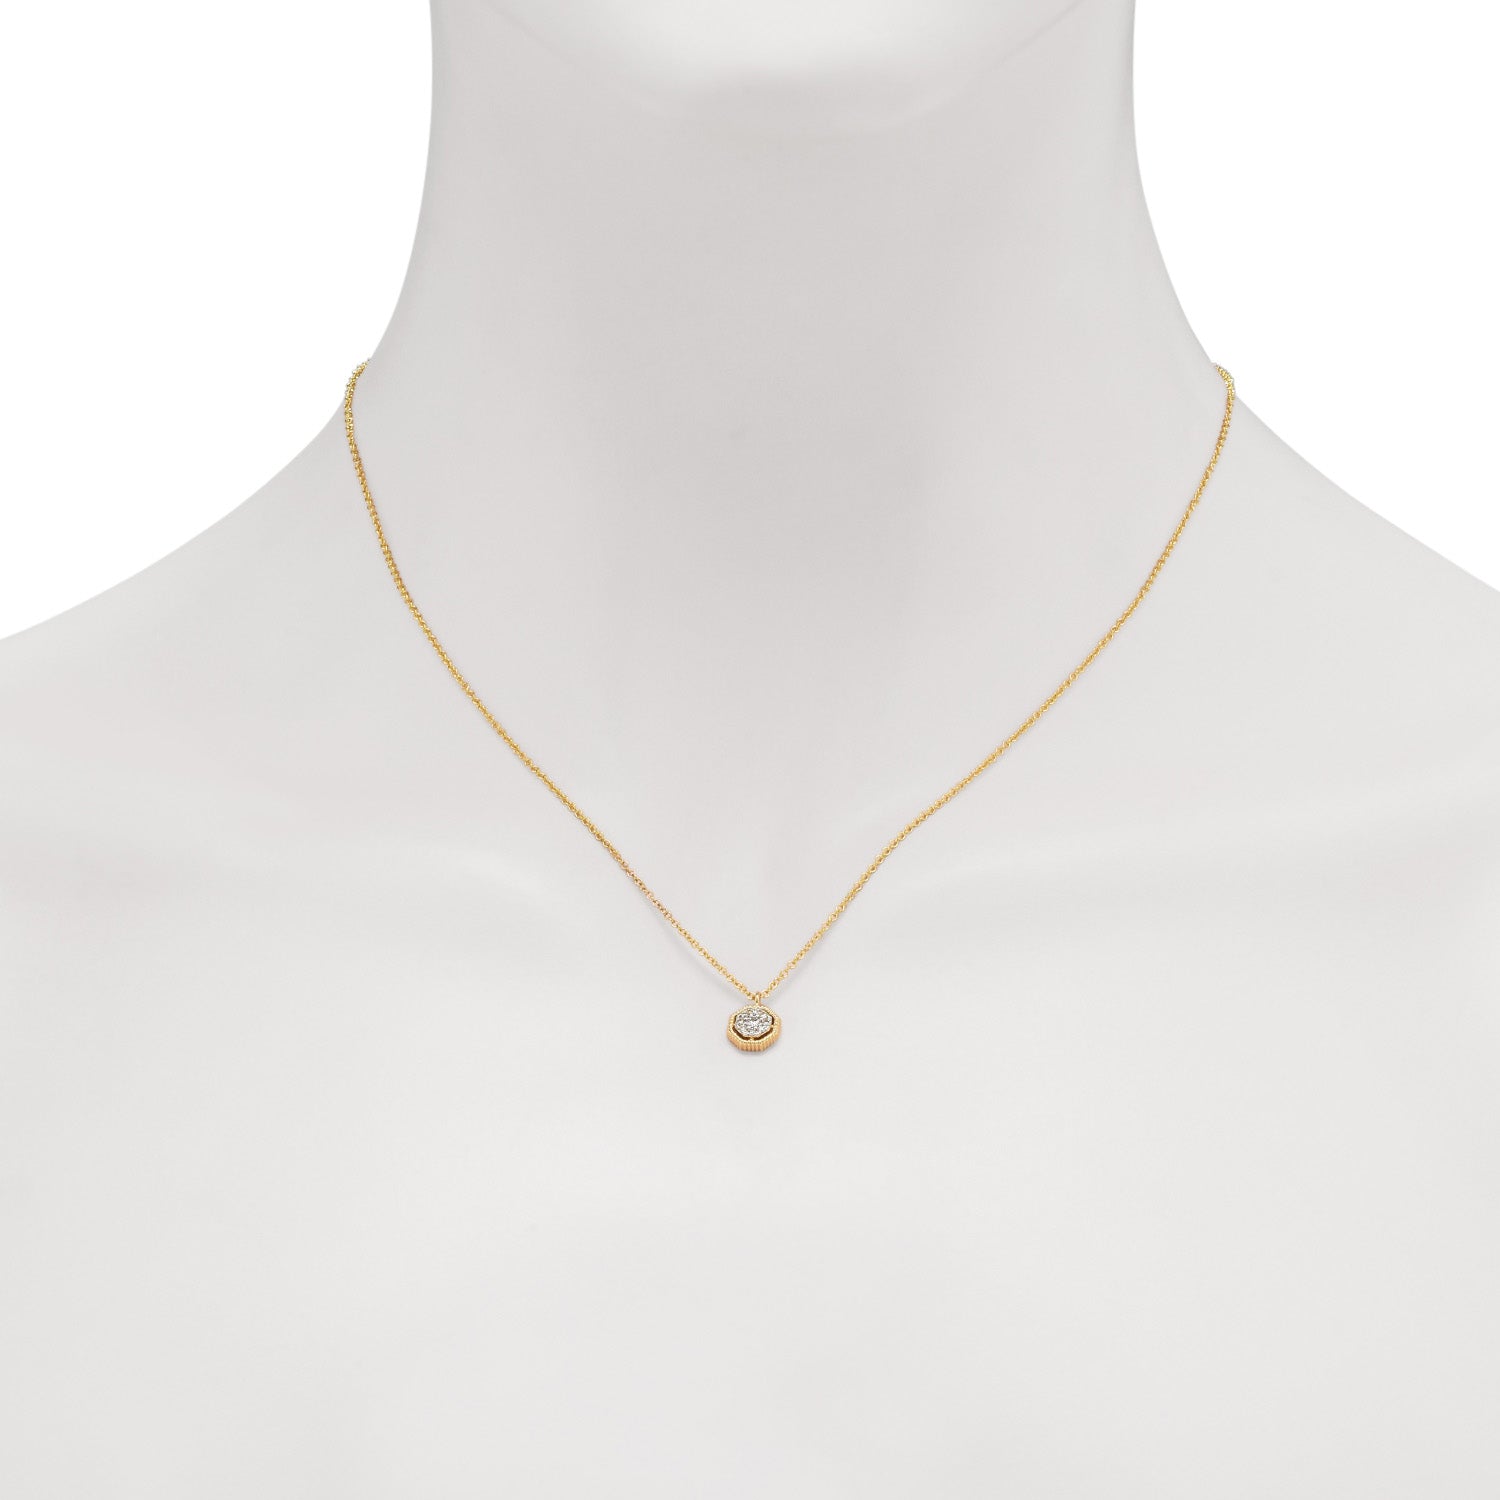 Gabriel Diamond Pave Necklace in 14kt Yellow Gold (1/10ct tw)